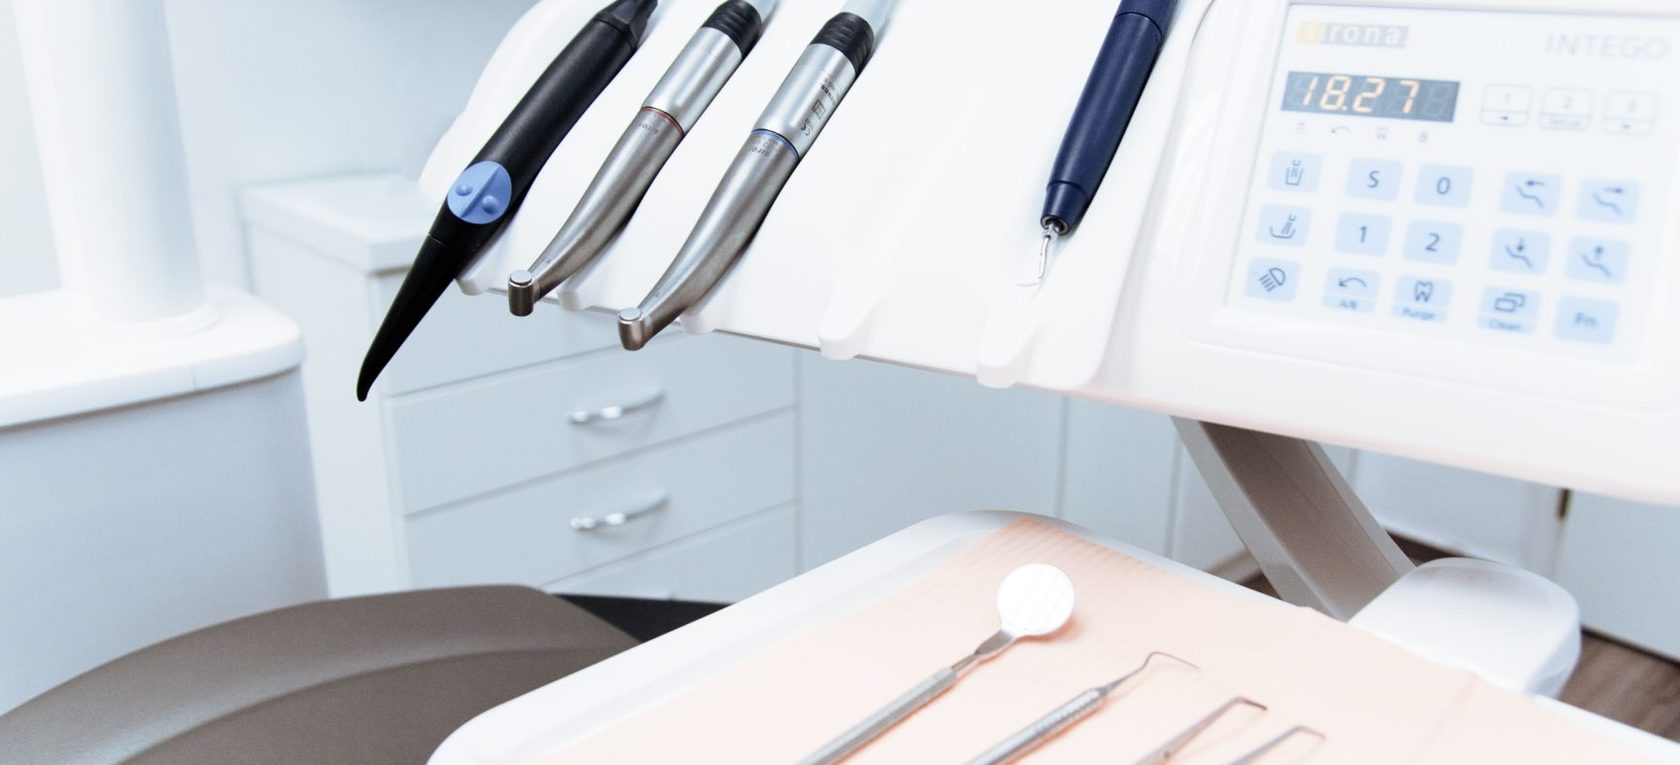 Rating of the best dental micromotors for 2022